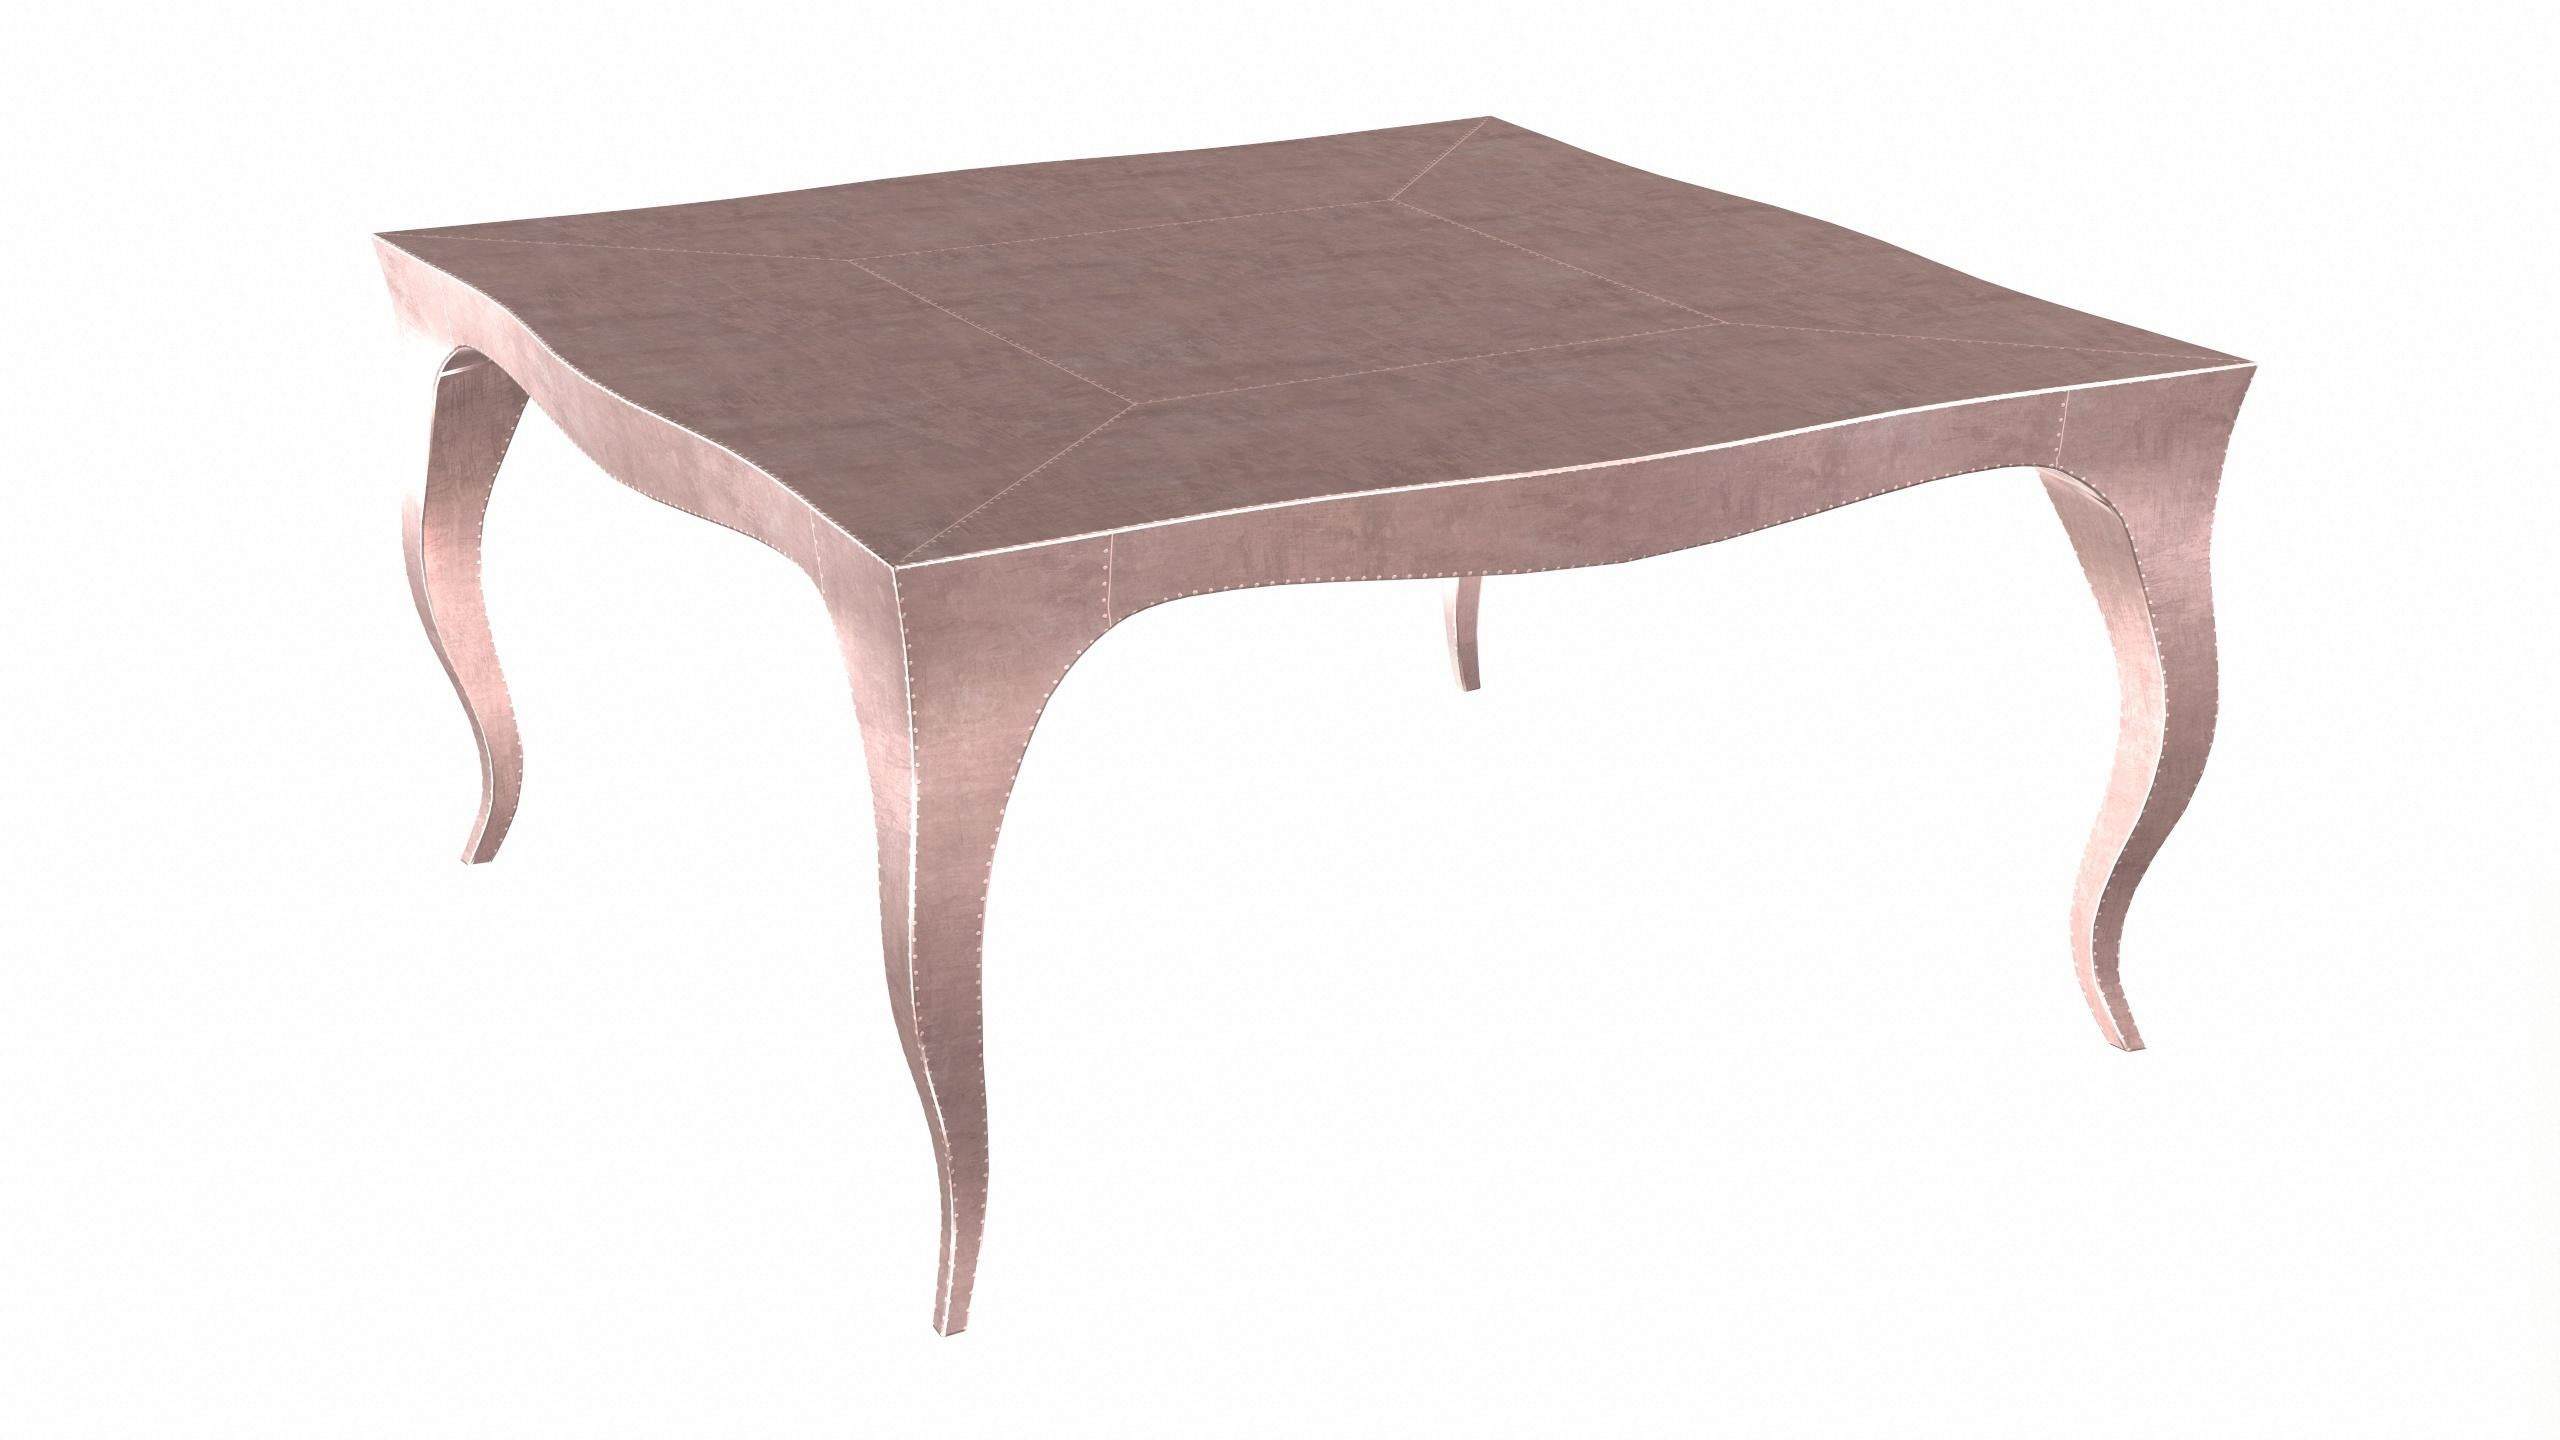 Contemporary Louise Art Decor Nesting Tables Smooth Copper 18.5x18.5x10 inch by Paul M. For Sale